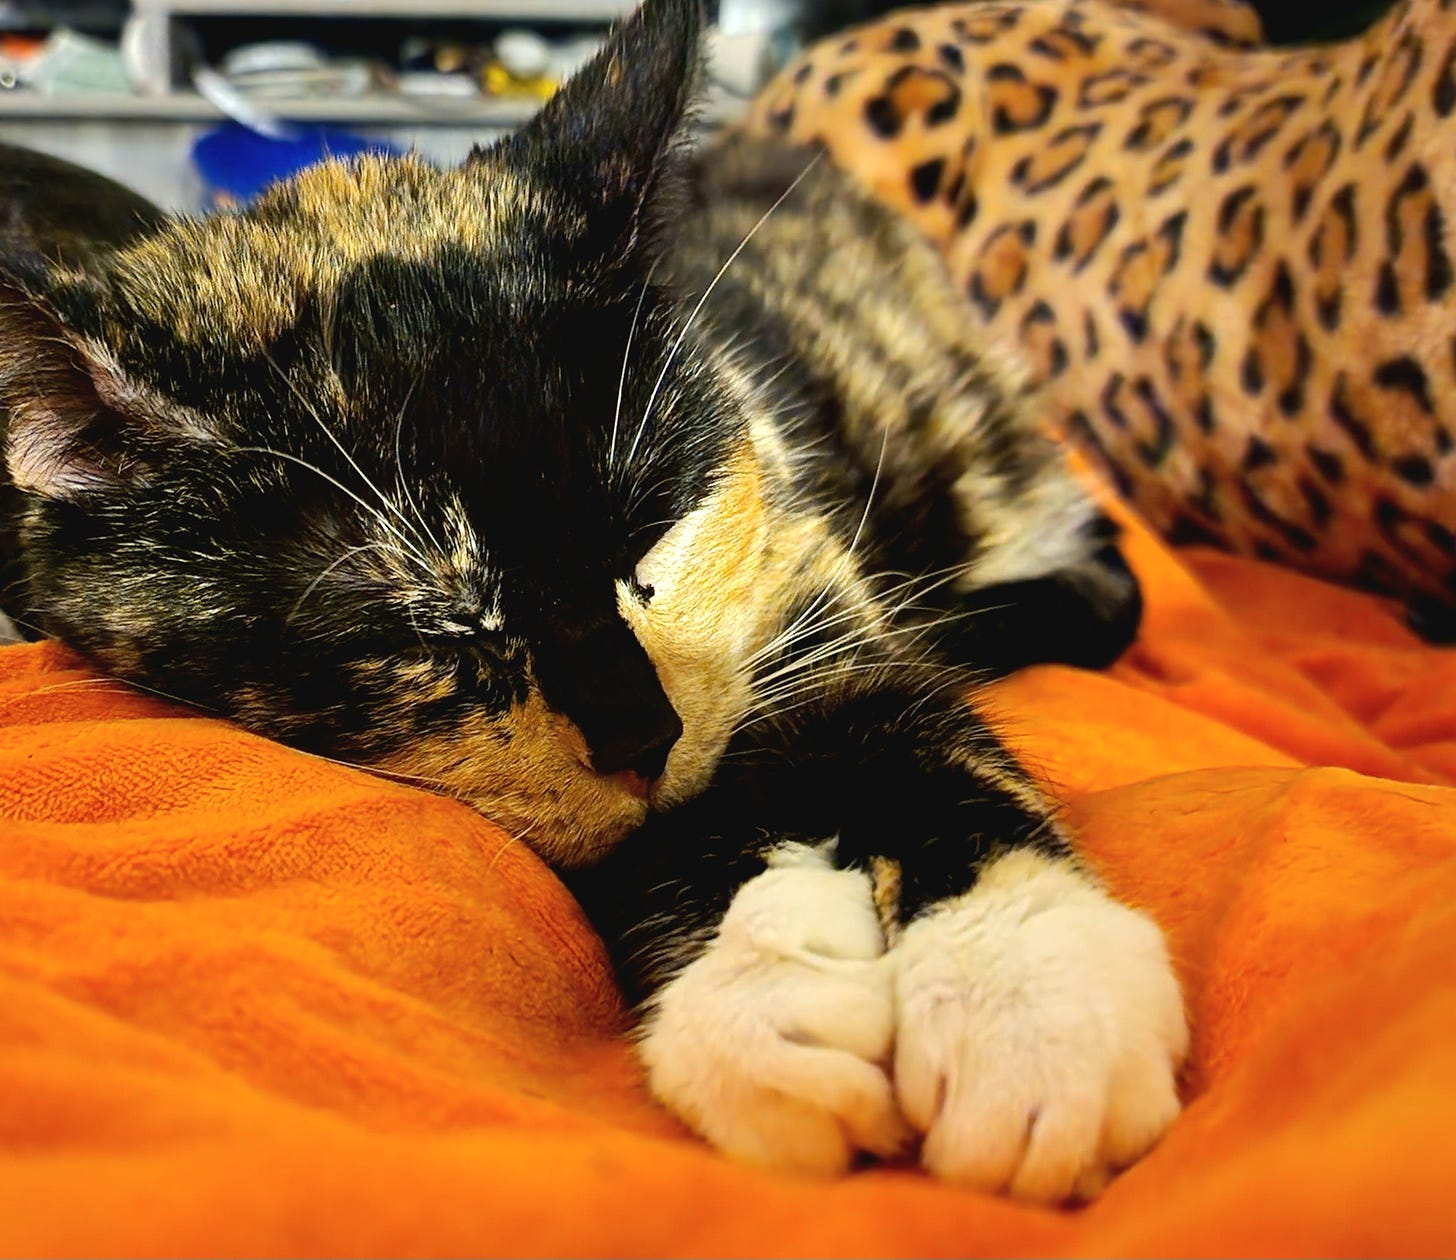 A torty/calico cat lies on an orange blanket, asleep, her paws stretched out towards the camera